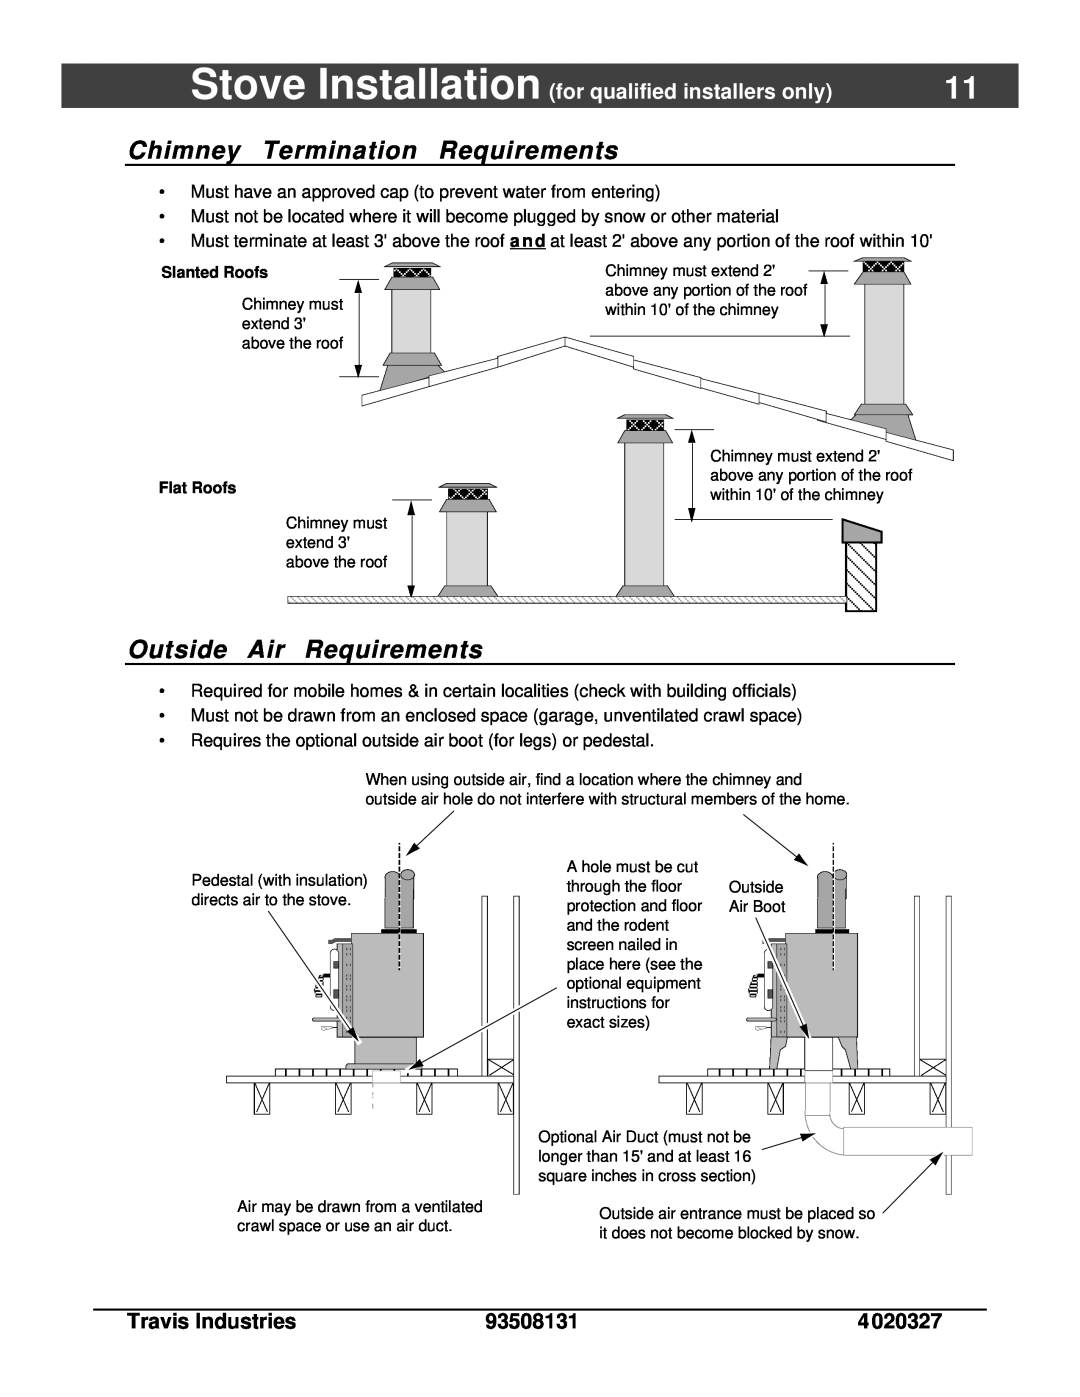 Lopi Answer Wood Stove owner manual Chimney Termination Requirements, Outside Air Requirements, Slanted Roofs, Flat 